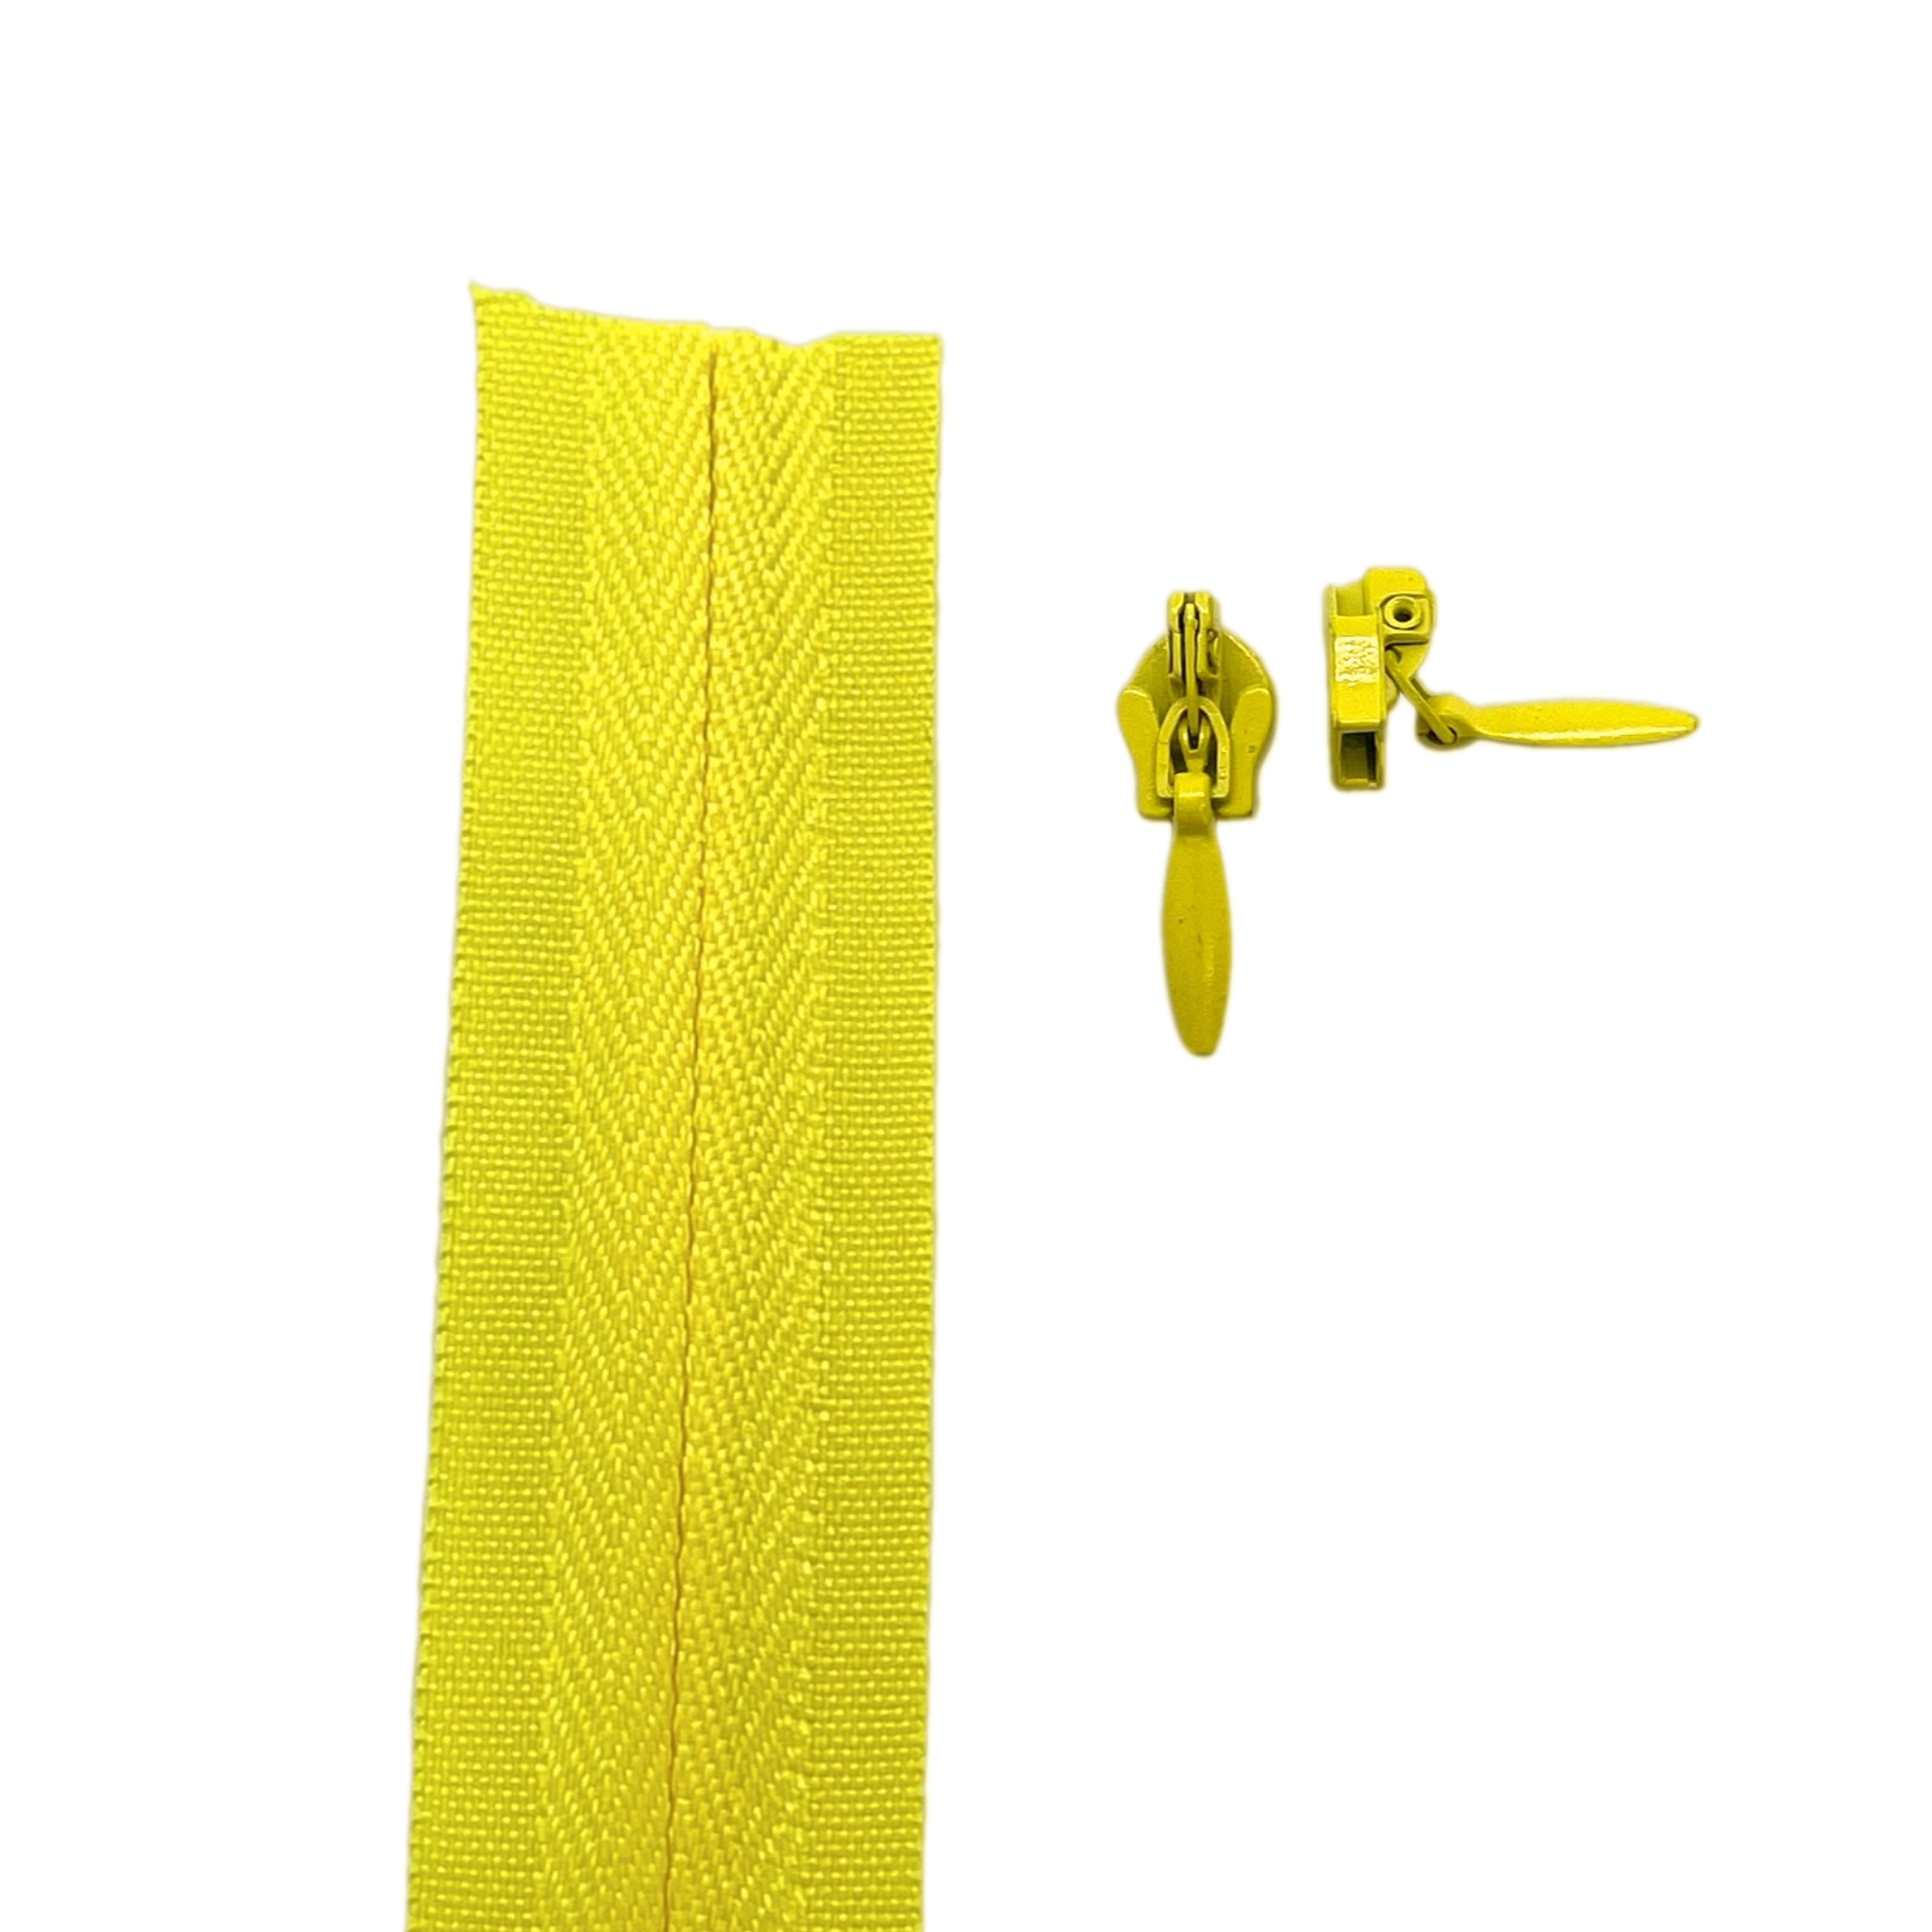 Daffodil yellow Invisible continuous zipper roll in long chain style with sliders of 2 per metre